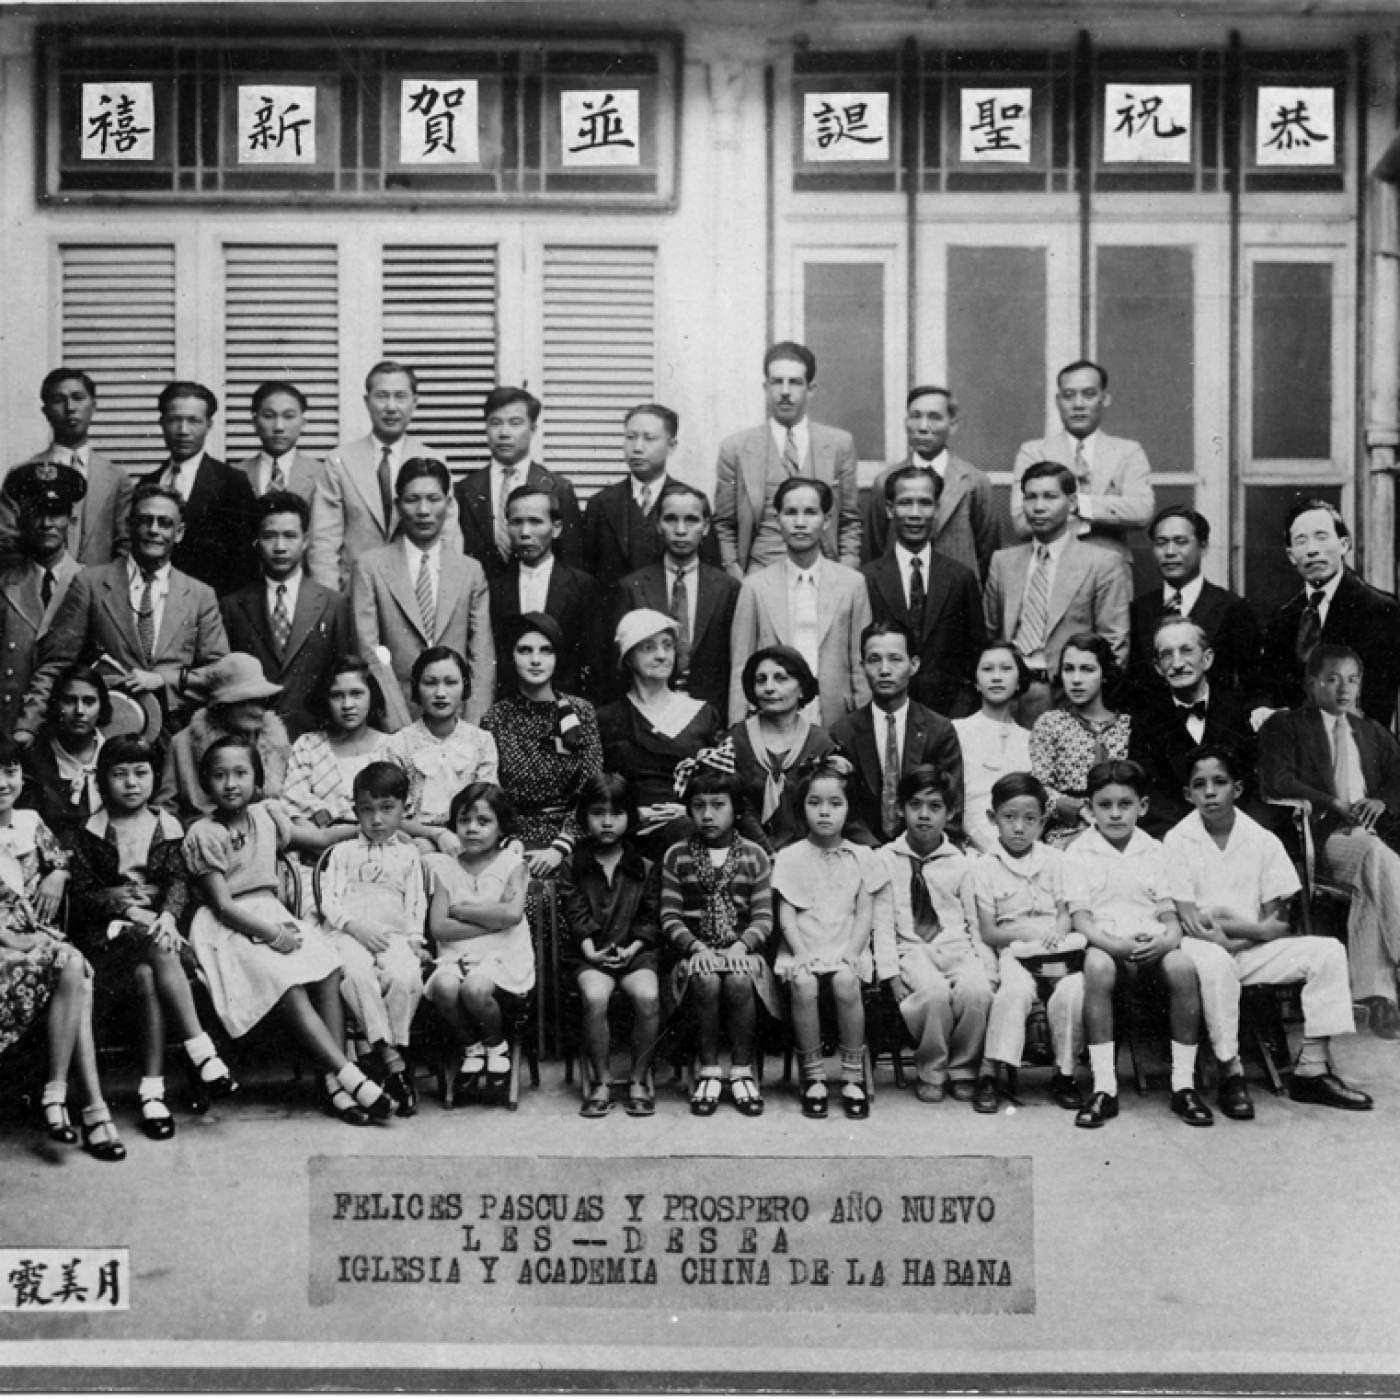 996.047.002 Sepia-toned group photo of the Chinese Church and Academy of Havana (Iglesia y Academia China de la Habana, or Zhonghua xuexiao/Zhonghua jidu jiaohui). Aurora Len (née Aurora Tang) sits in the front row, first from left. Spanish text on the photo reads: “Felices pascuas y prospero año nuevo, les desea, Iglesia y Academia China de la Habana.” Courtesy of Edwin K. Len, Museum of Chinese in America (MOCA) Collection.哈瓦那华人教会和学院（Iglesia y Academia China de la Habana，或中华学校/中华基督教会）的棕褐色调的合影。 Aurora Len (née Aurora Tang) 坐在前排，左起第一位。照片上的西班牙文写道：“祝您复活节快乐，新年快乐，哈瓦那华人教会和学院。”由Edwin K. Len 捐赠，美国华人博物馆 (MOCA) 馆藏。